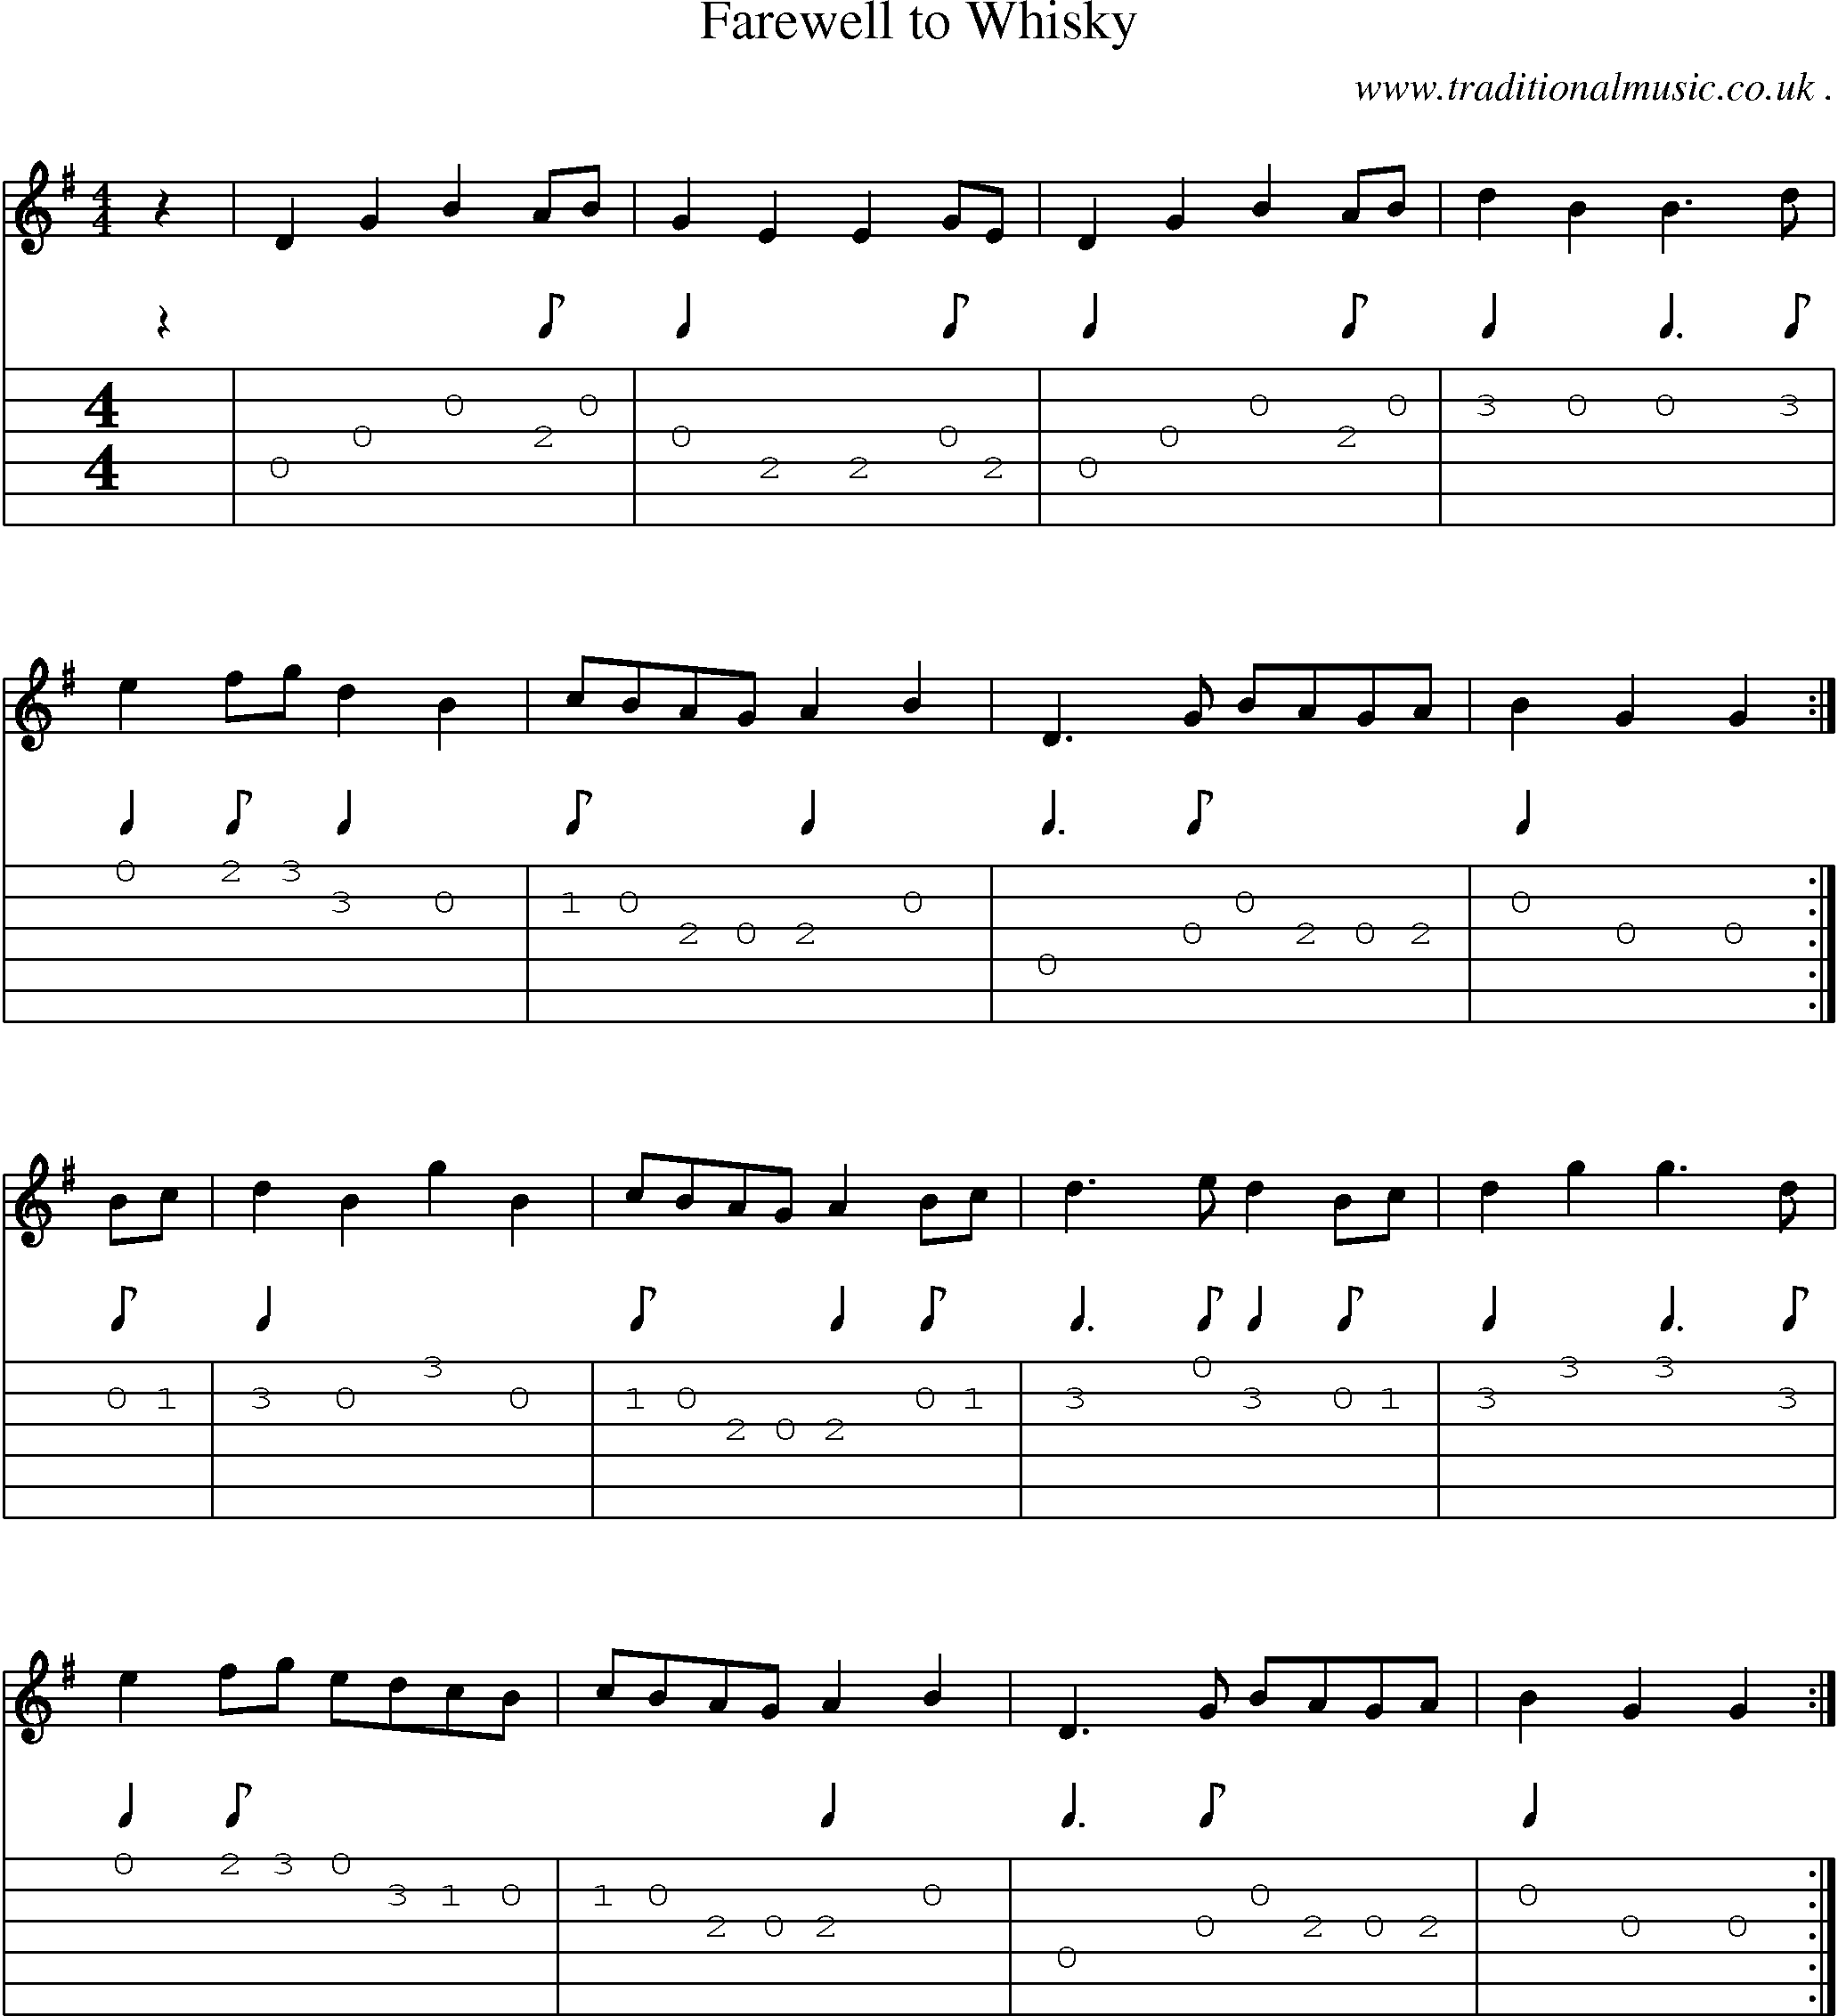 Sheet-music  score, Chords and Guitar Tabs for Farewell To Whisky